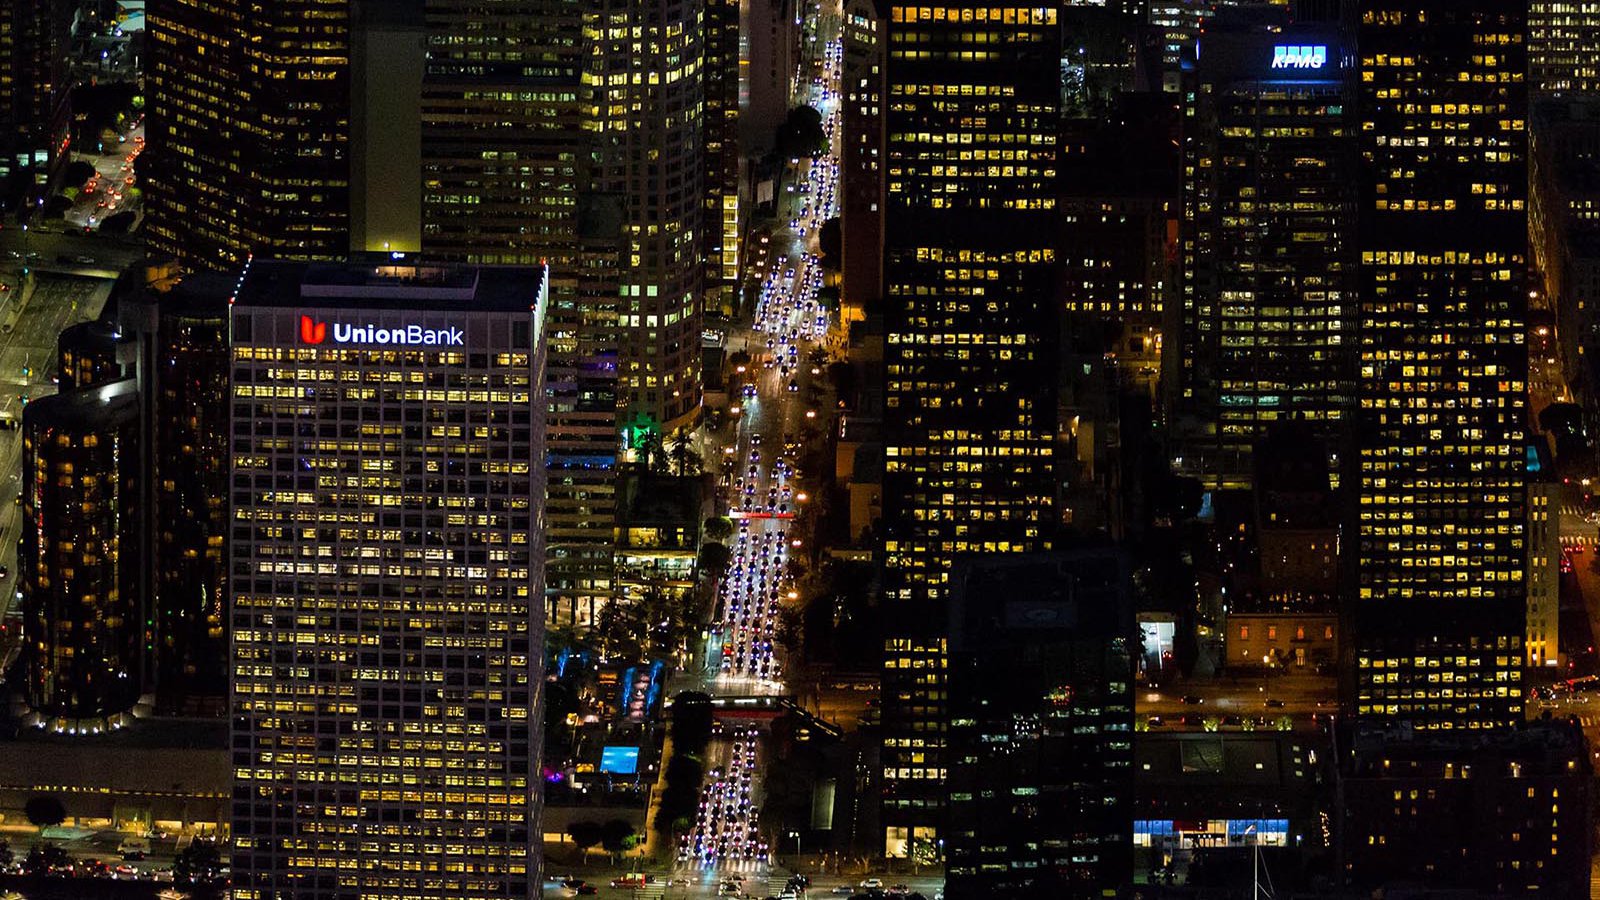 Aerial cityscape close-up image in between the buildings of Downtown Los Angeles at Night